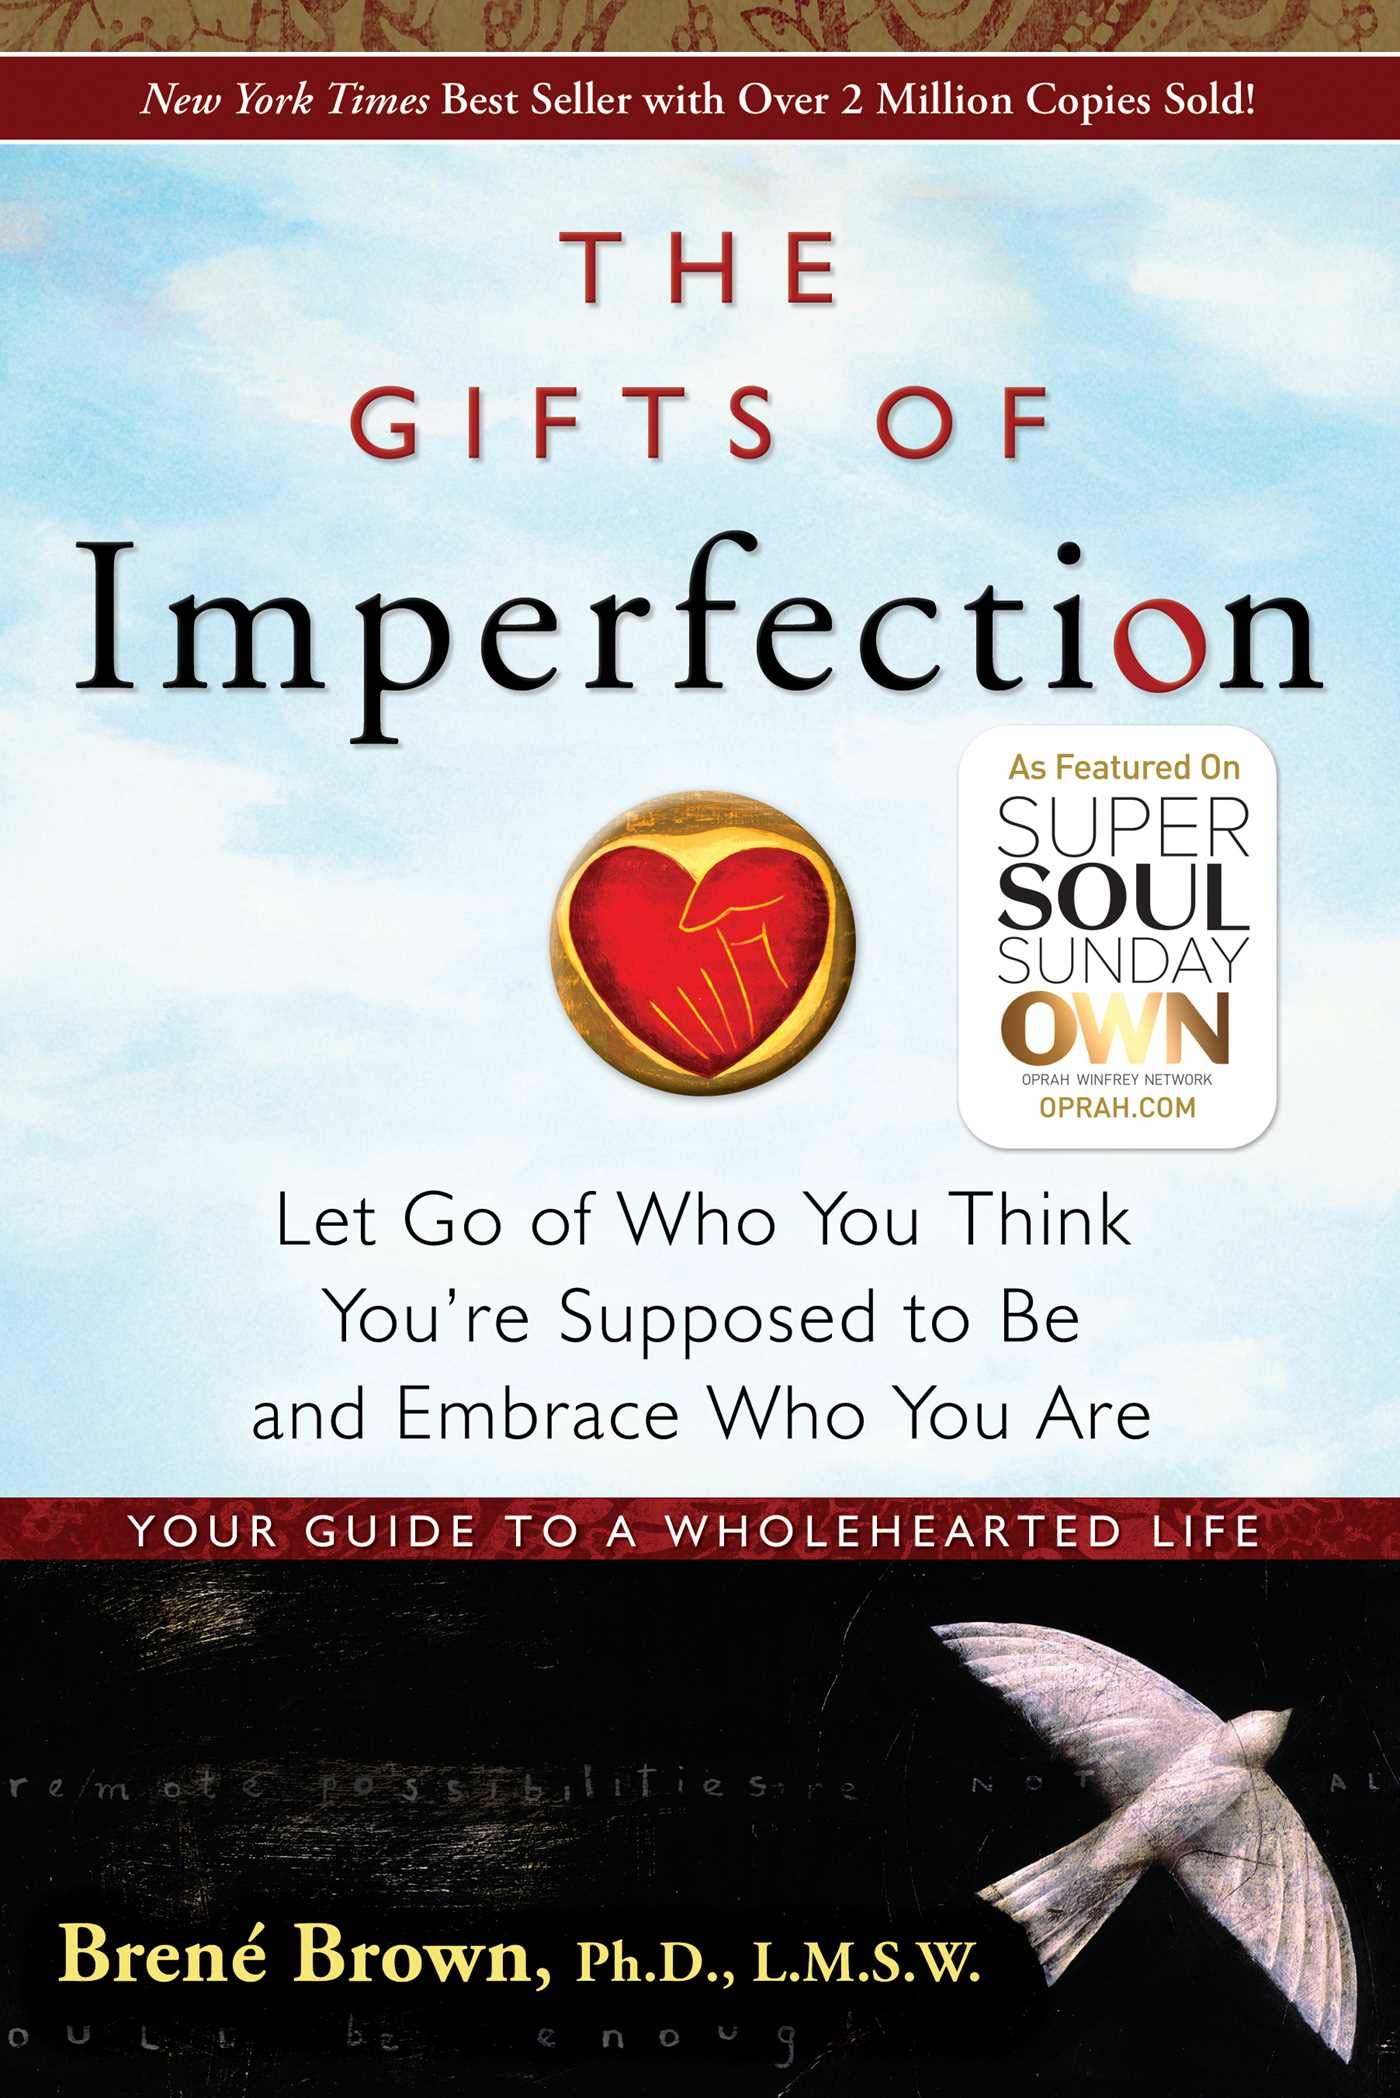 The gifts of imperfection audiobook - Is it a self-help book?